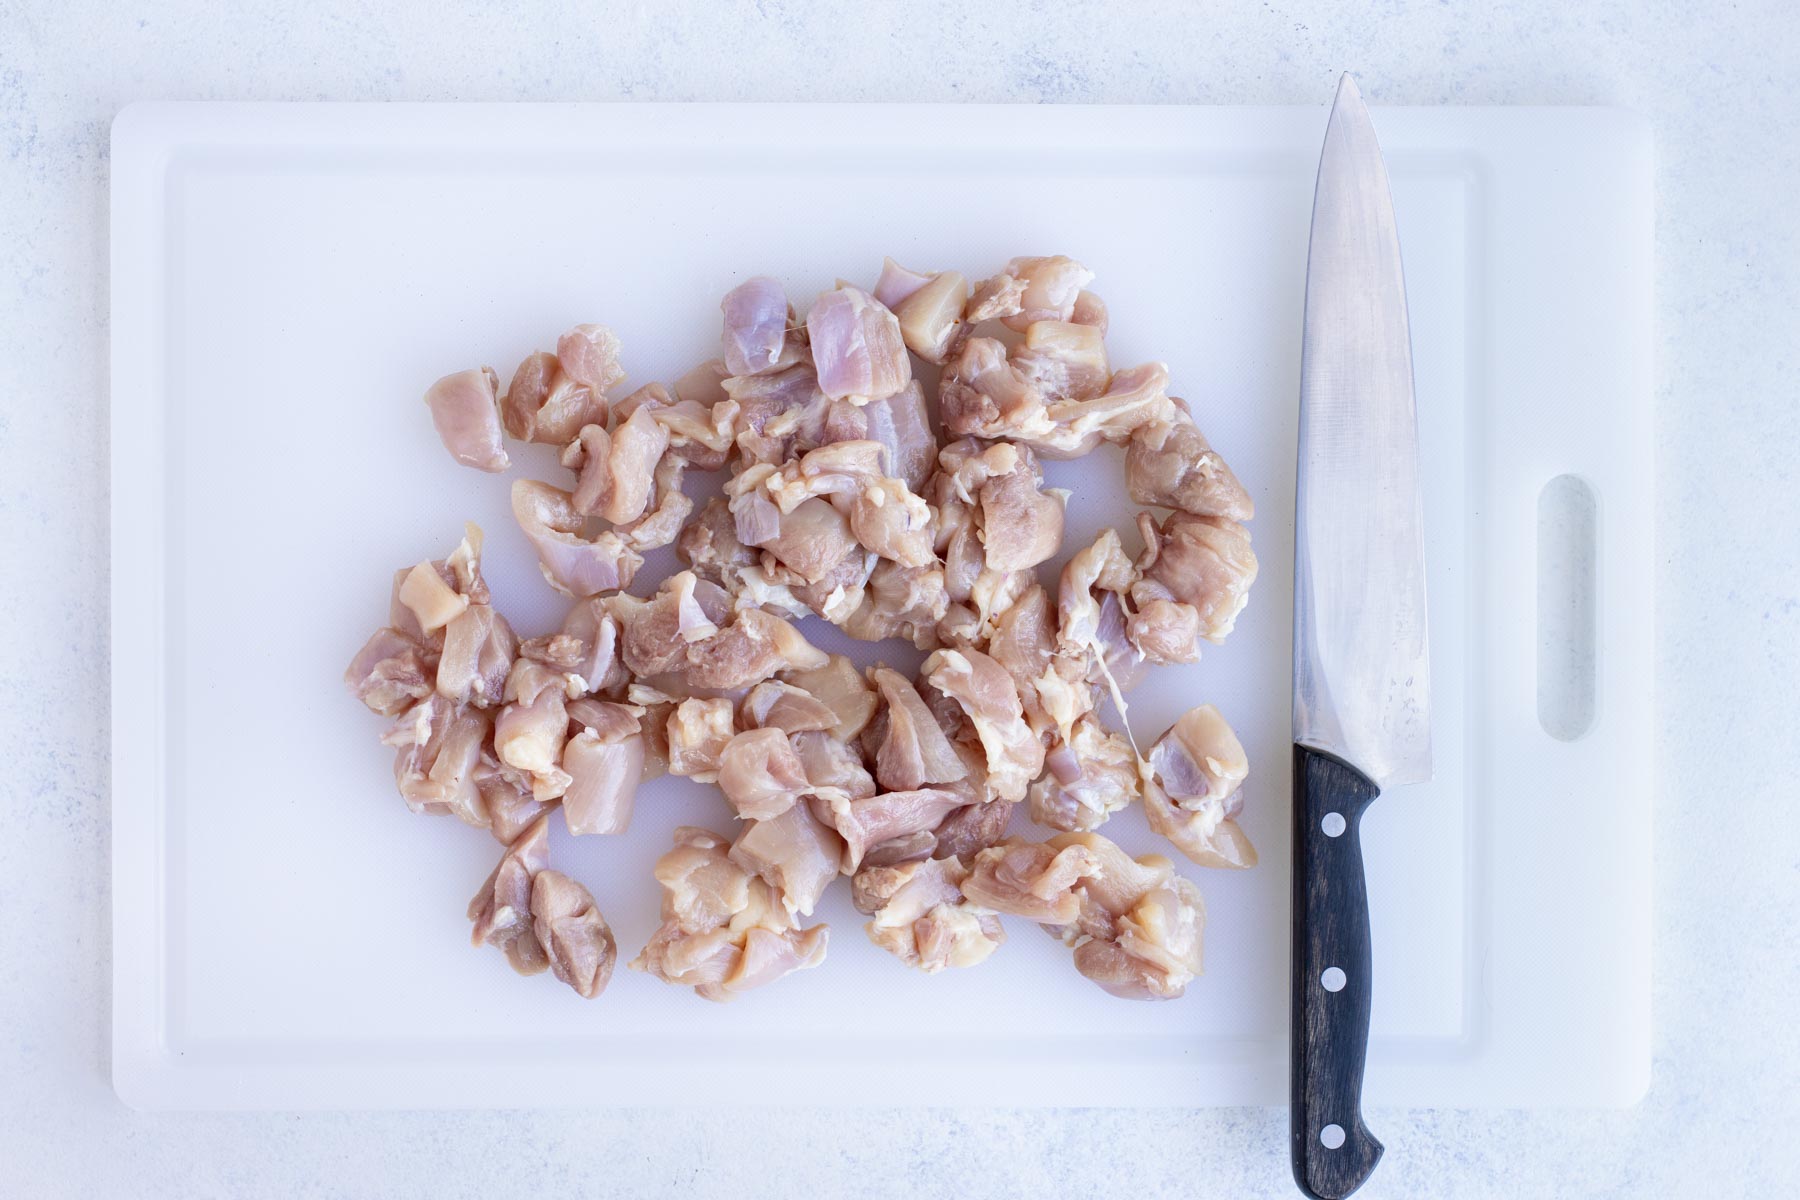 Chicken thighs are chopped into pieces with a knife.